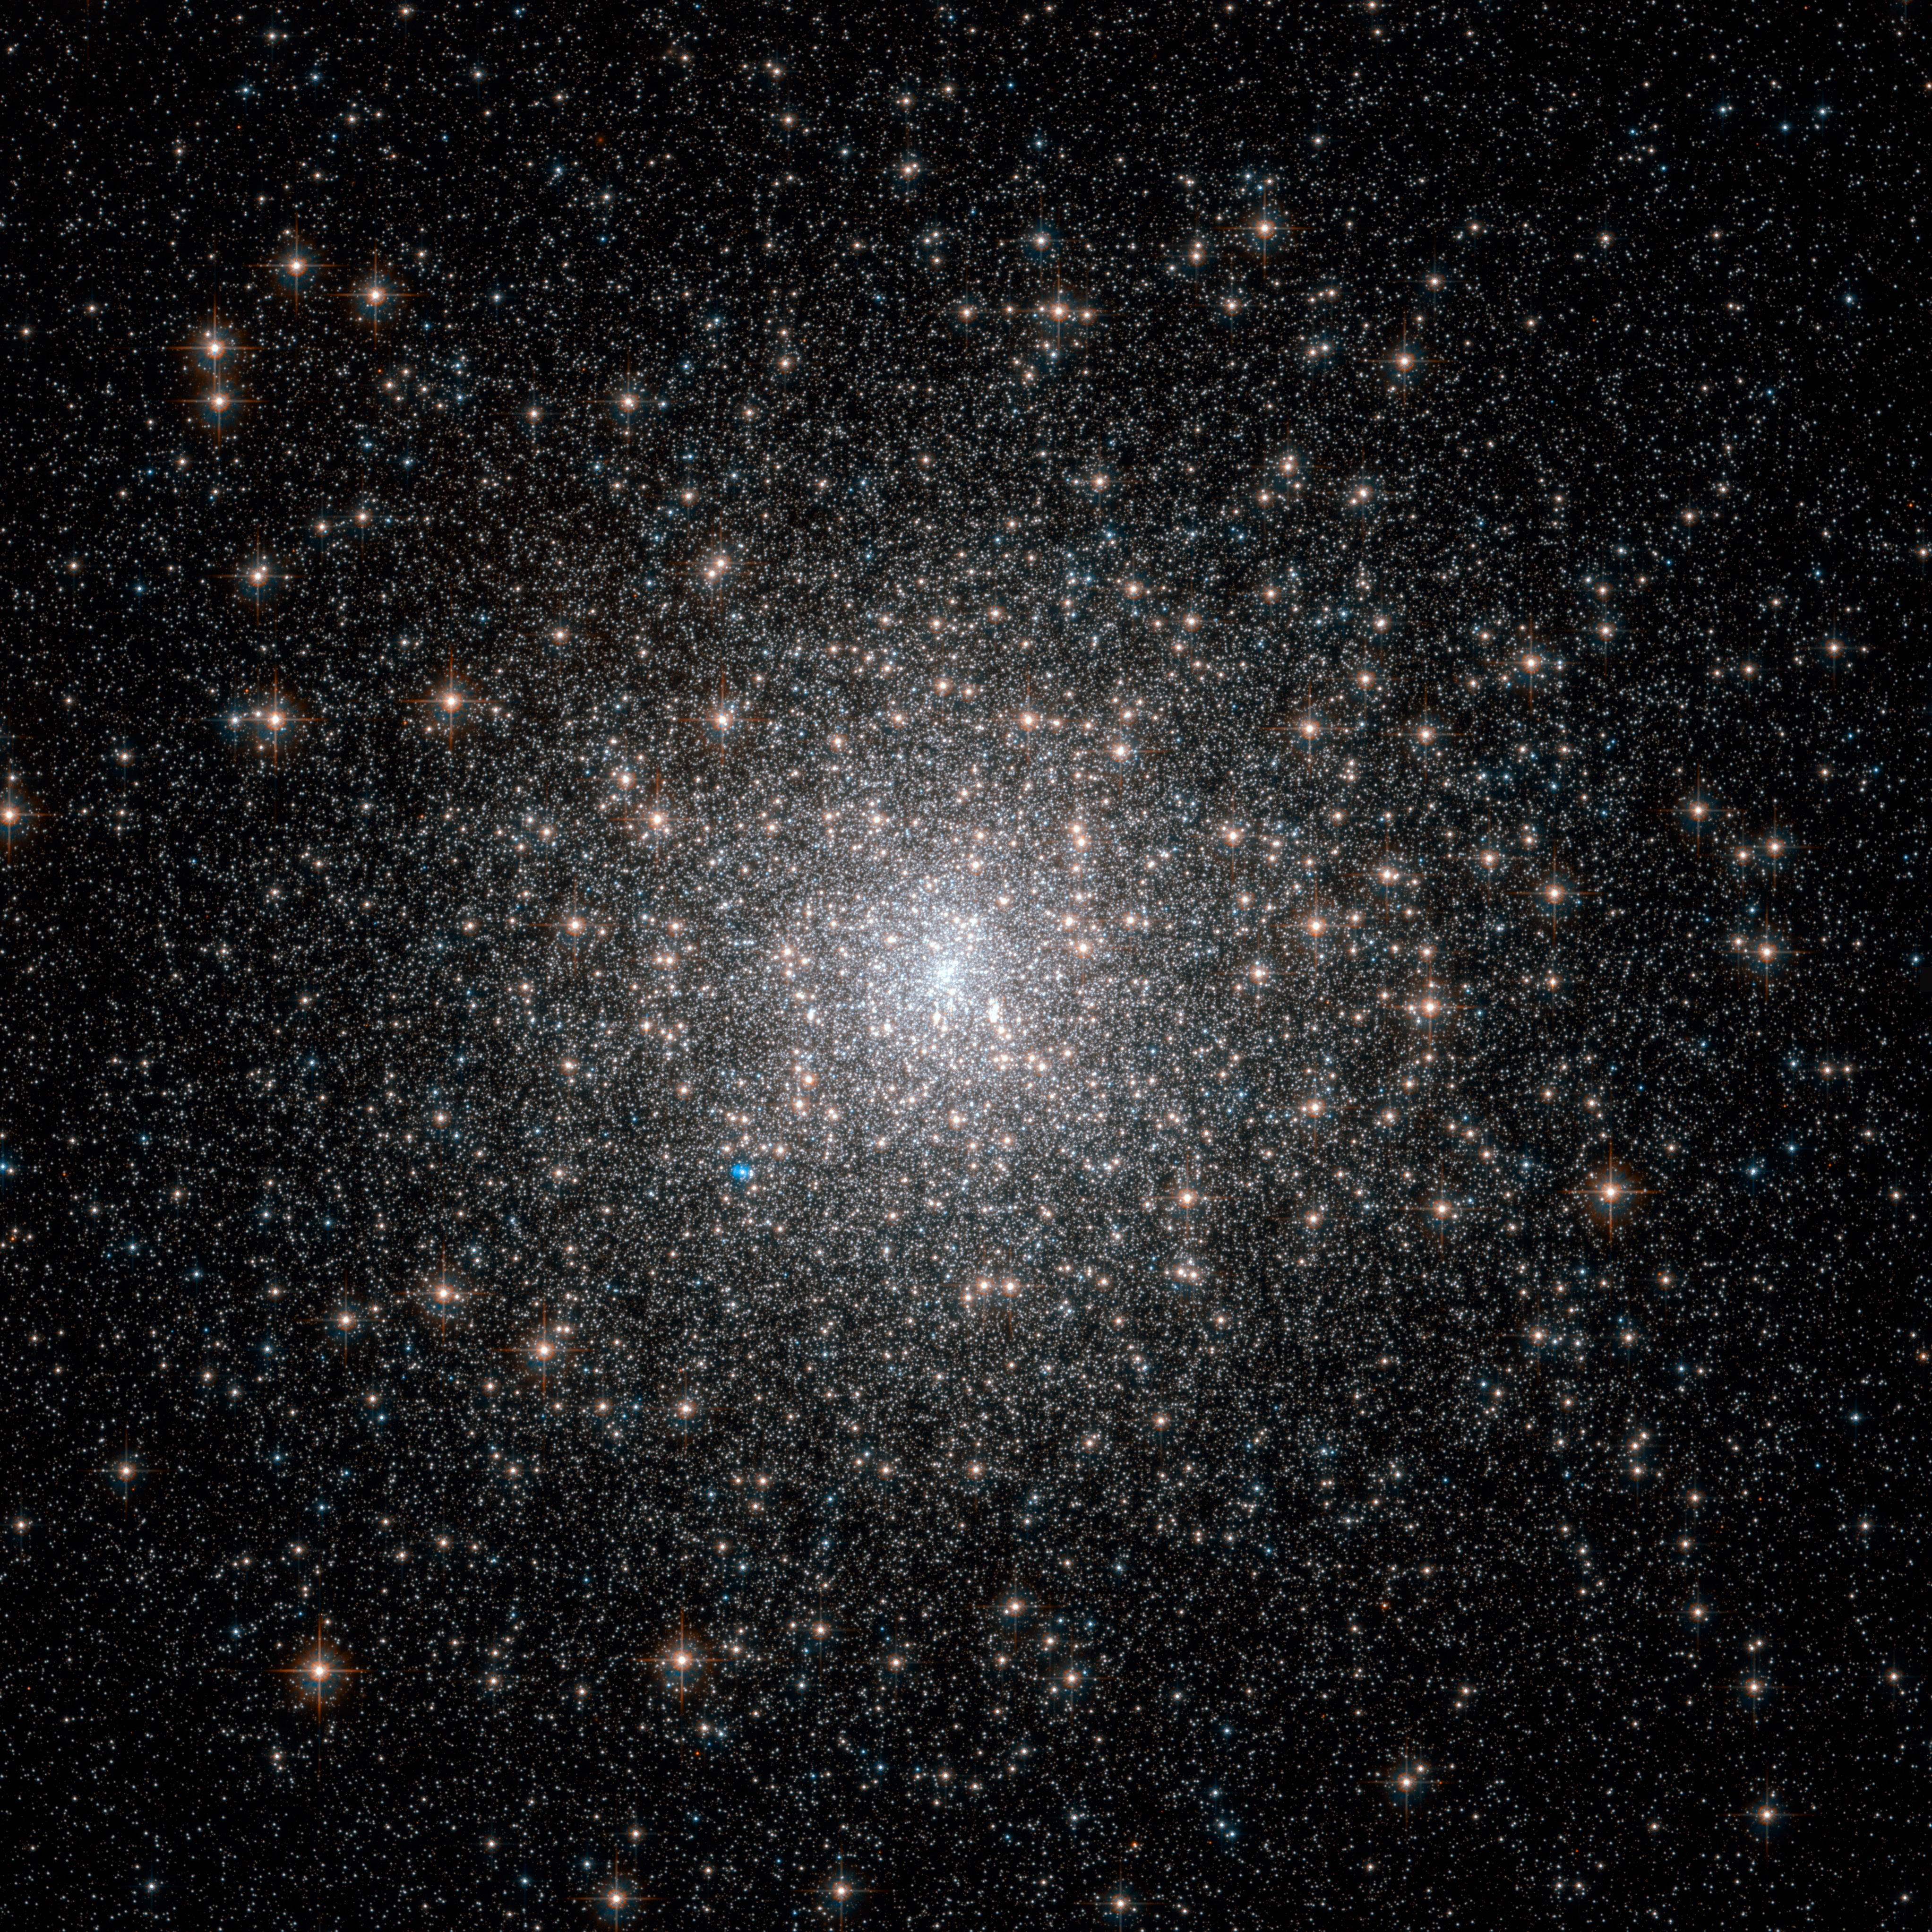 Globular Cluster M15 from Hubble